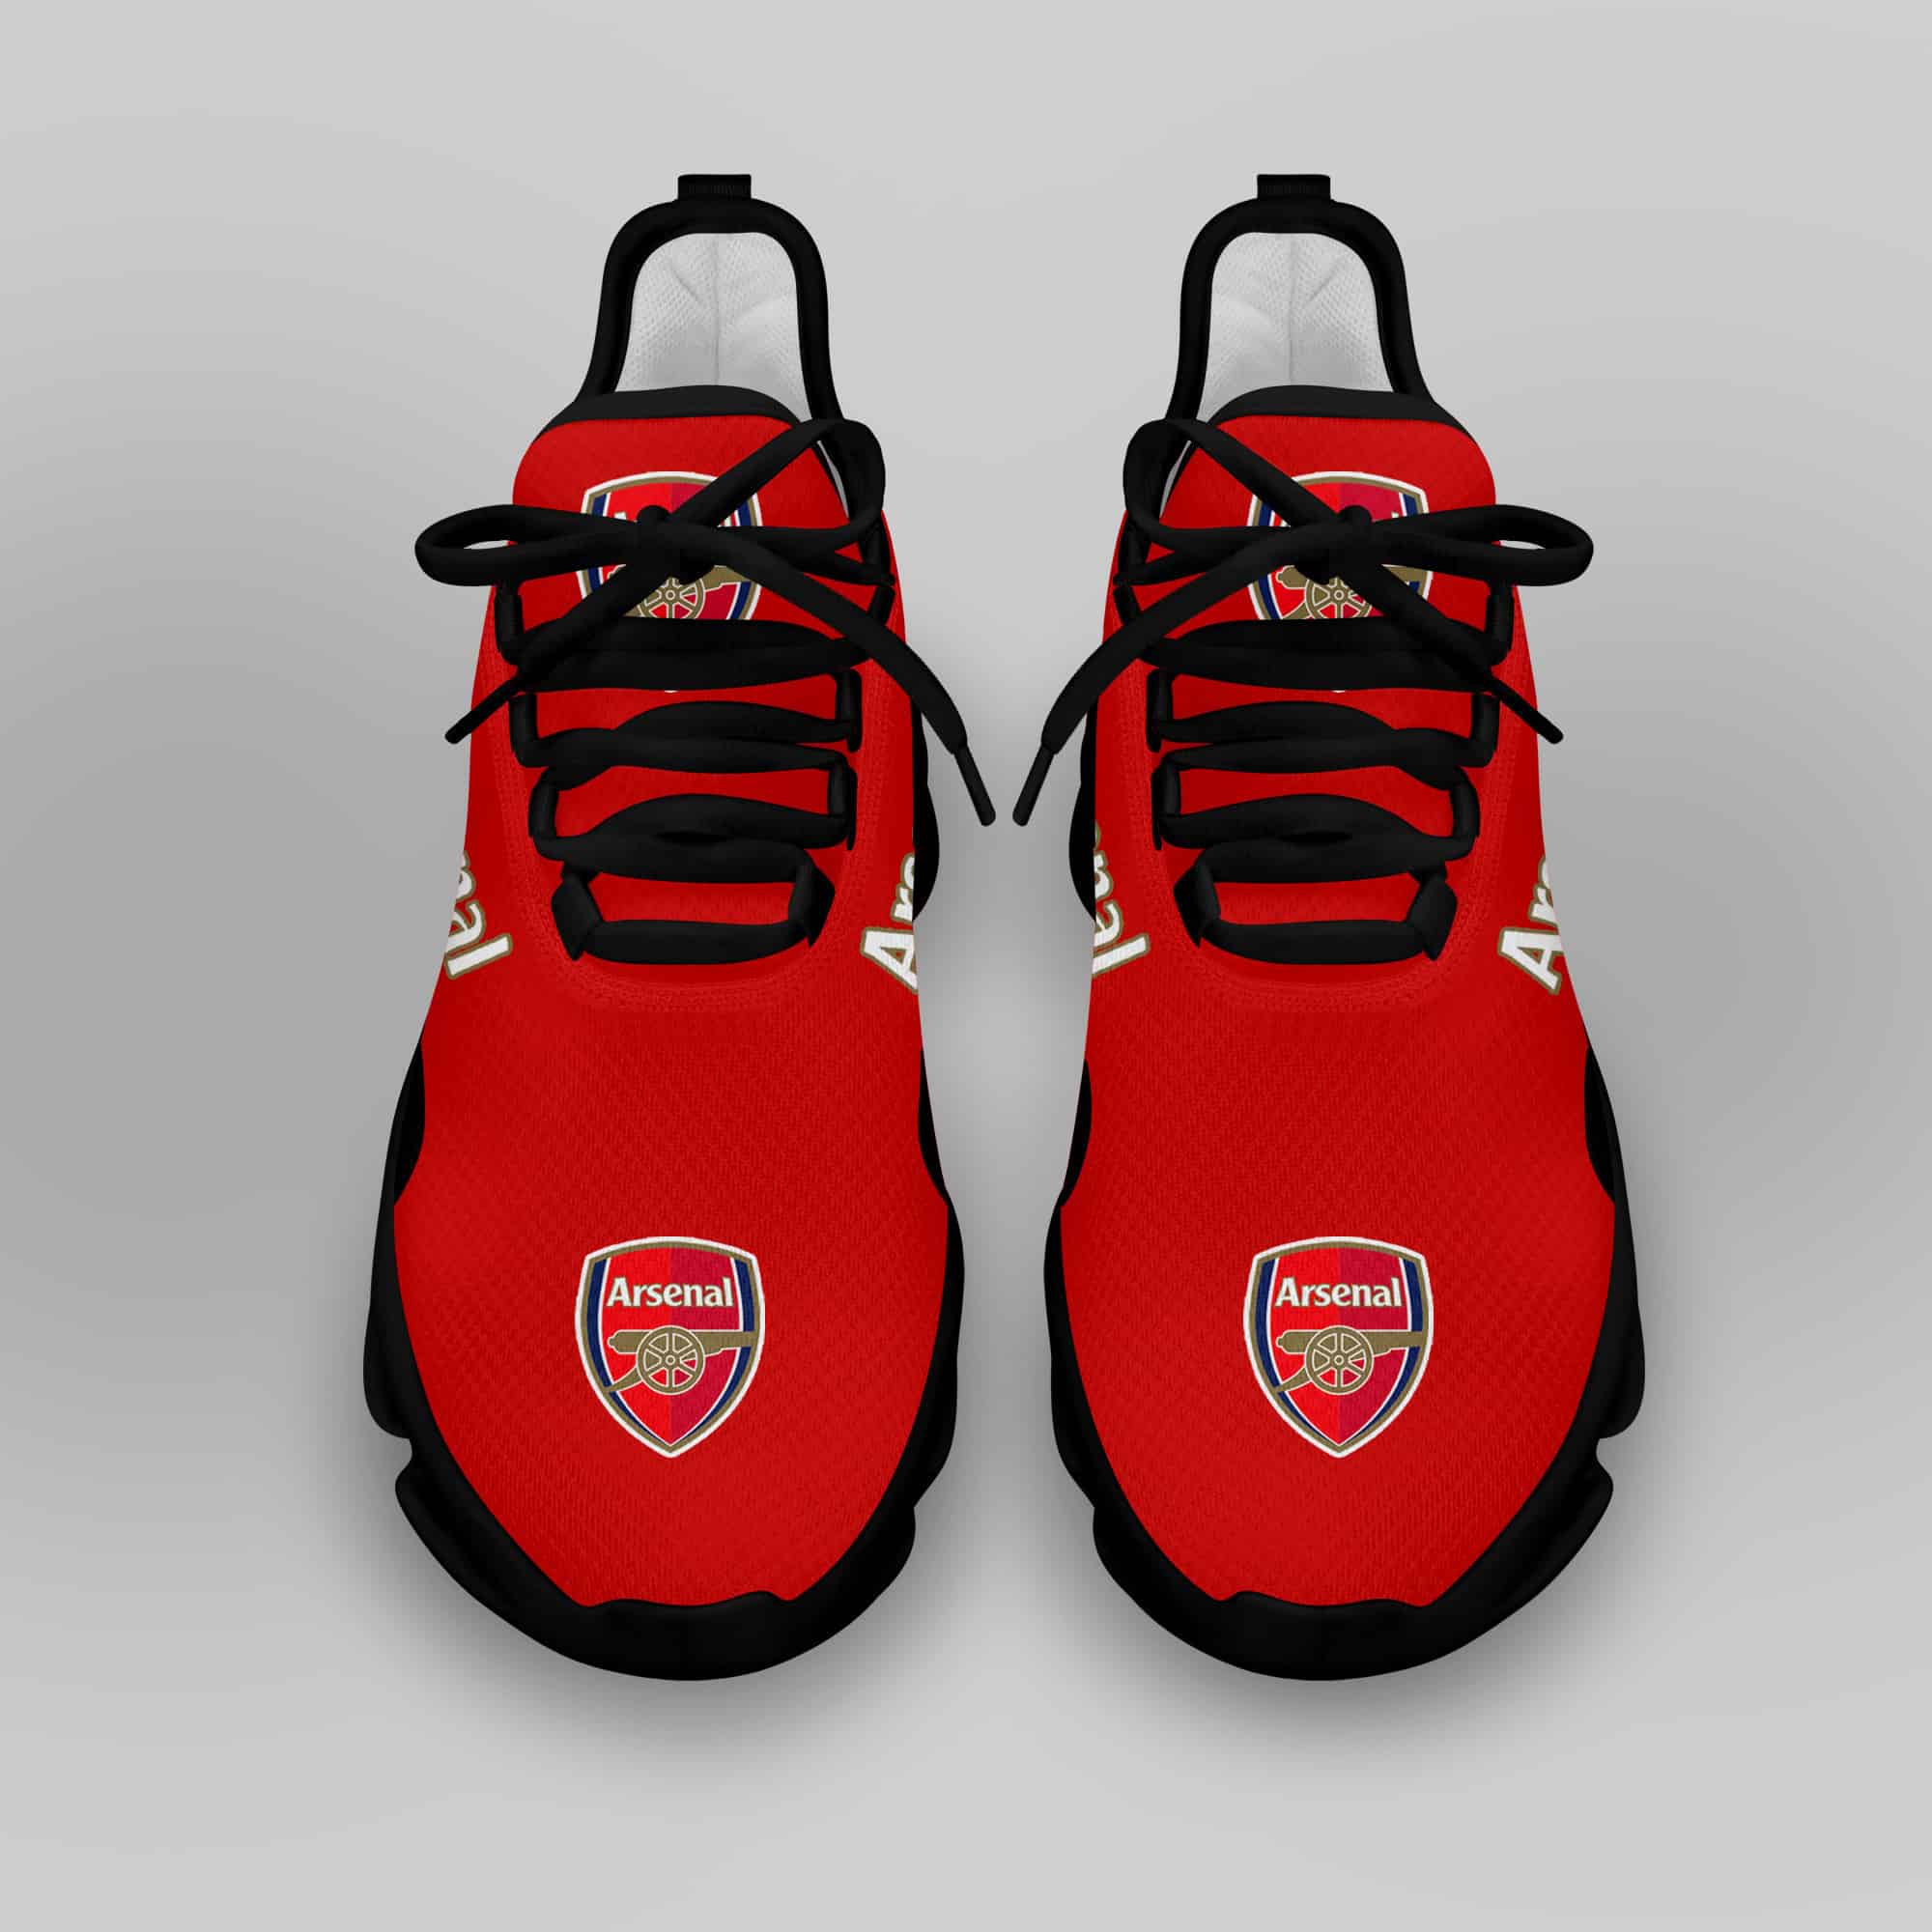 Arsenal Running Shoes Max Soul Shoes Sneakers Ver 1 4